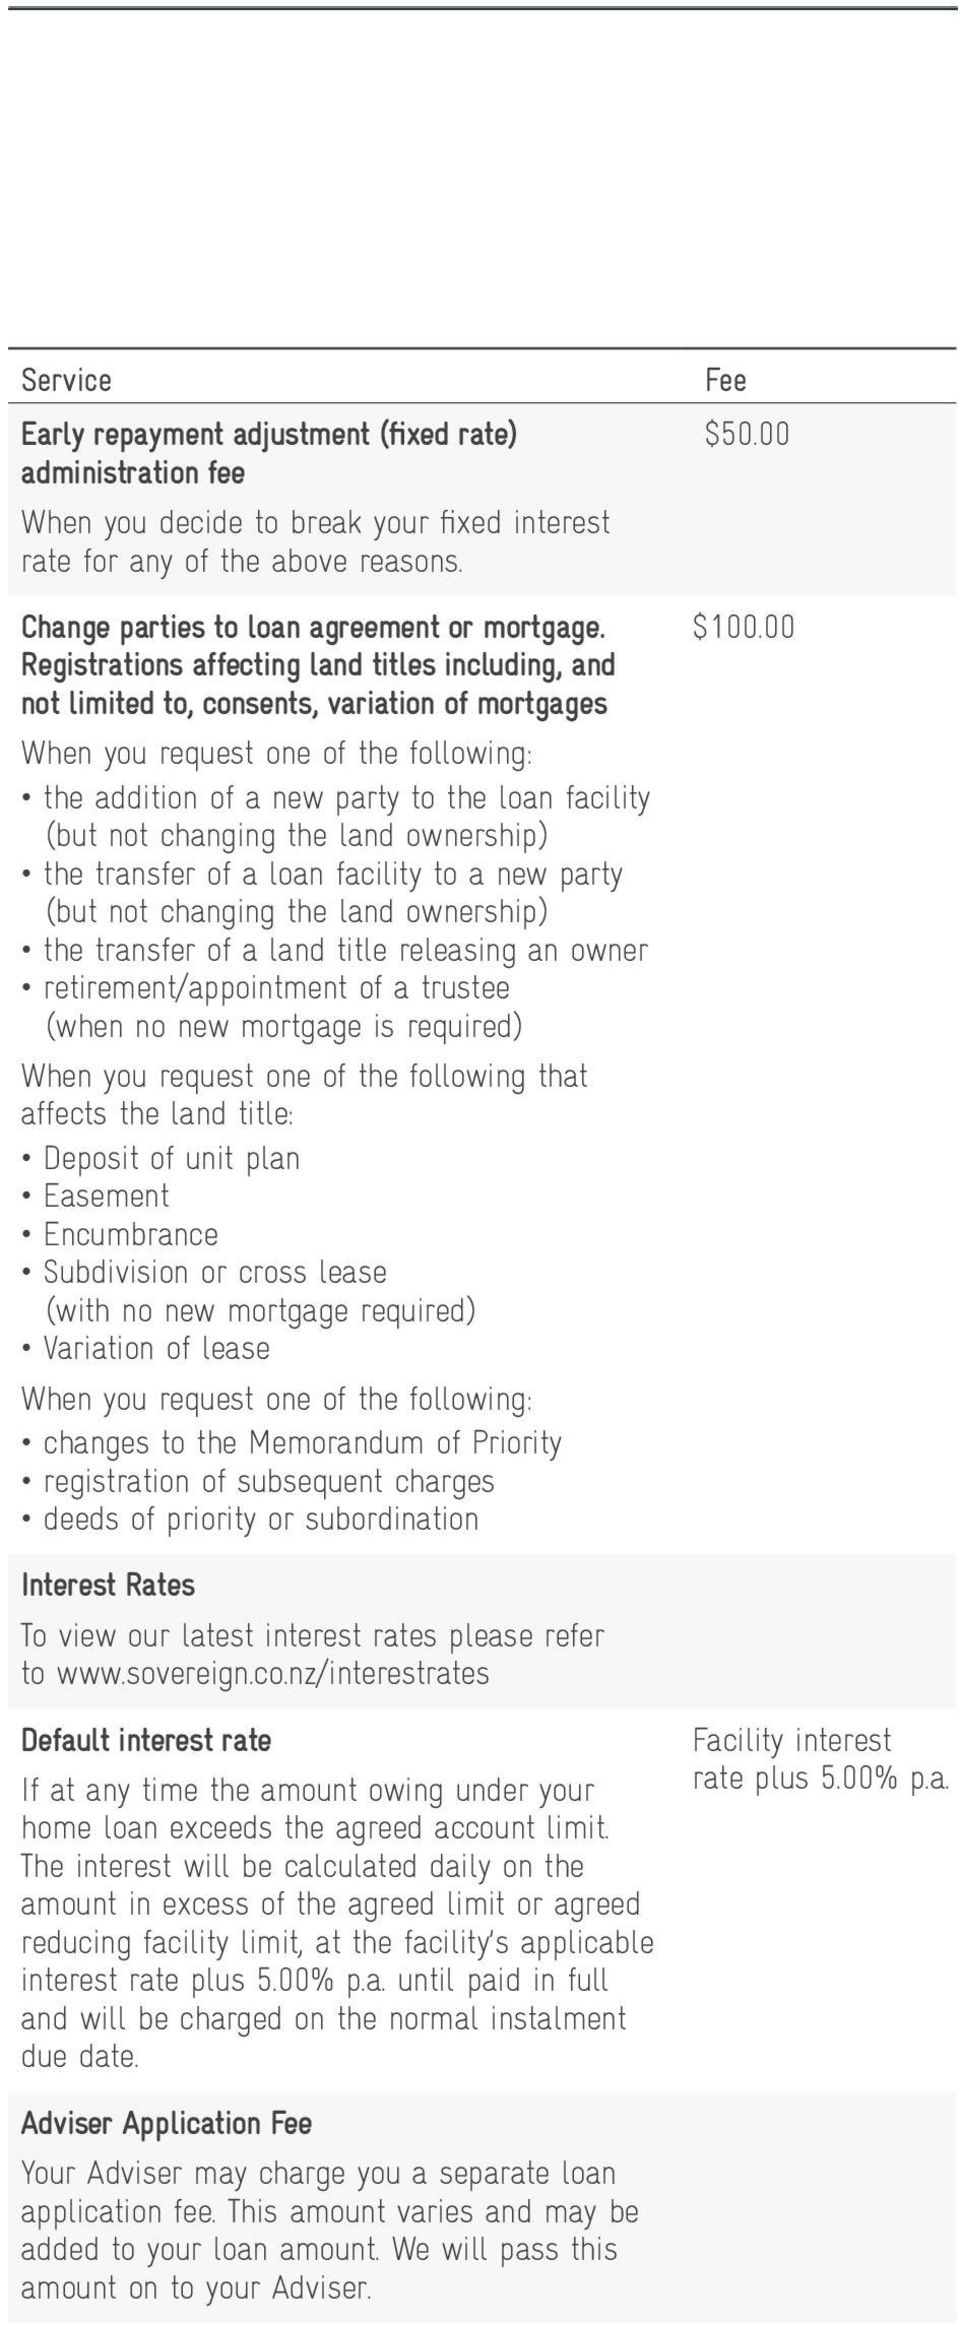 changing the land ownership) the transfer of a loan facility to a new party (but not changing the land ownership) the transfer of a land title releasing an owner retirement/appointment of a trustee